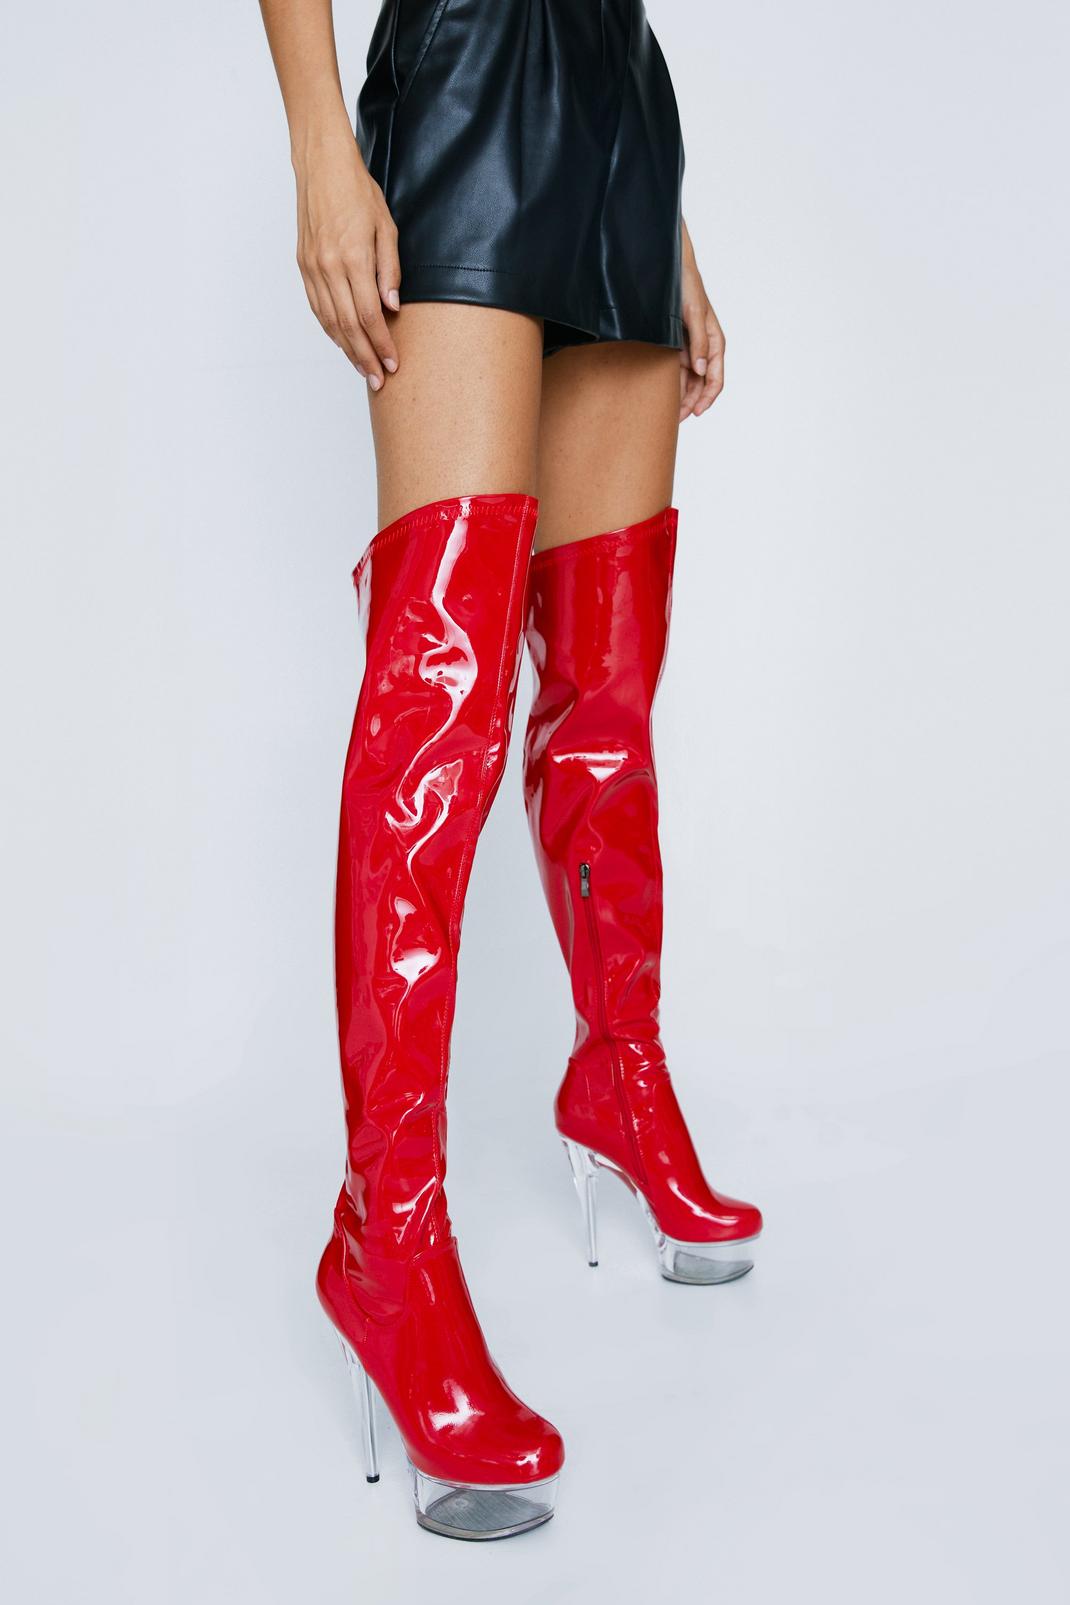 Bottes hautes vernies style danseuse, Red image number 1